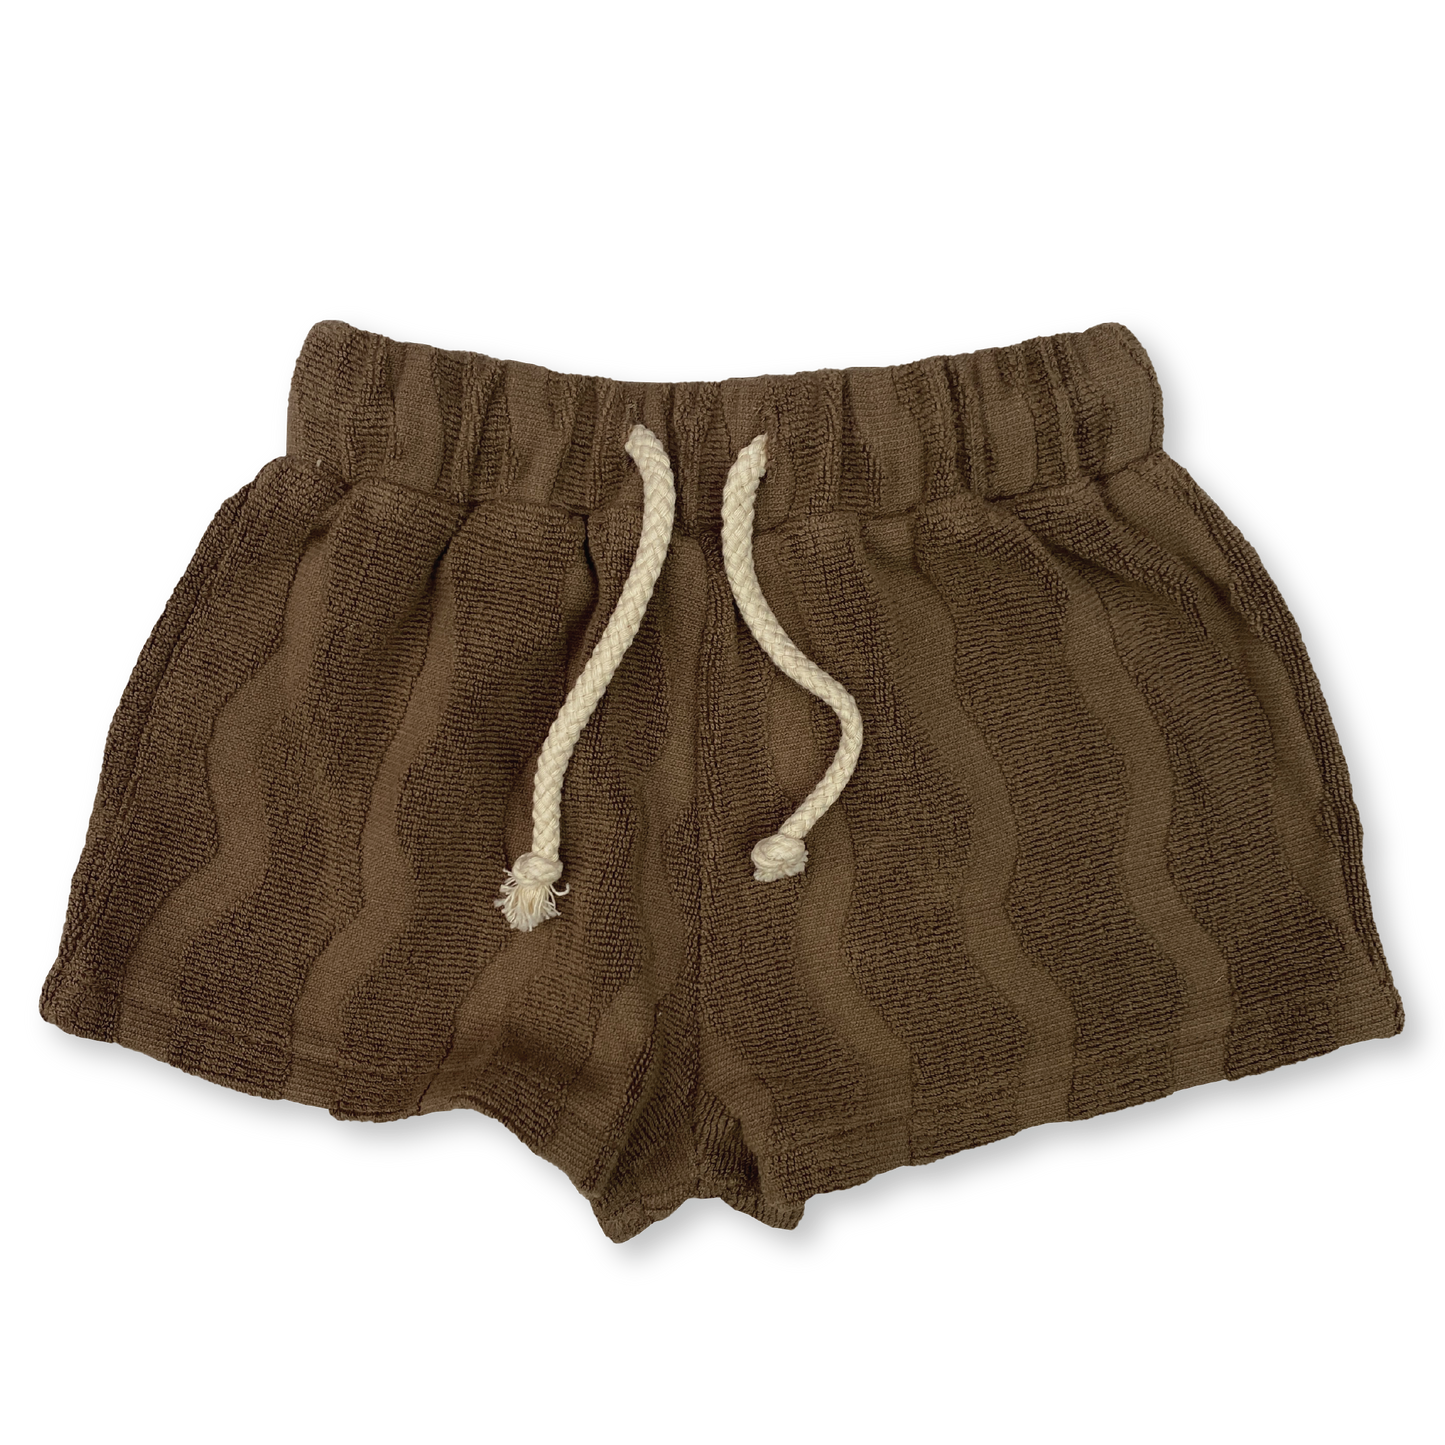 [GROWN] Terry Shorts / Mud